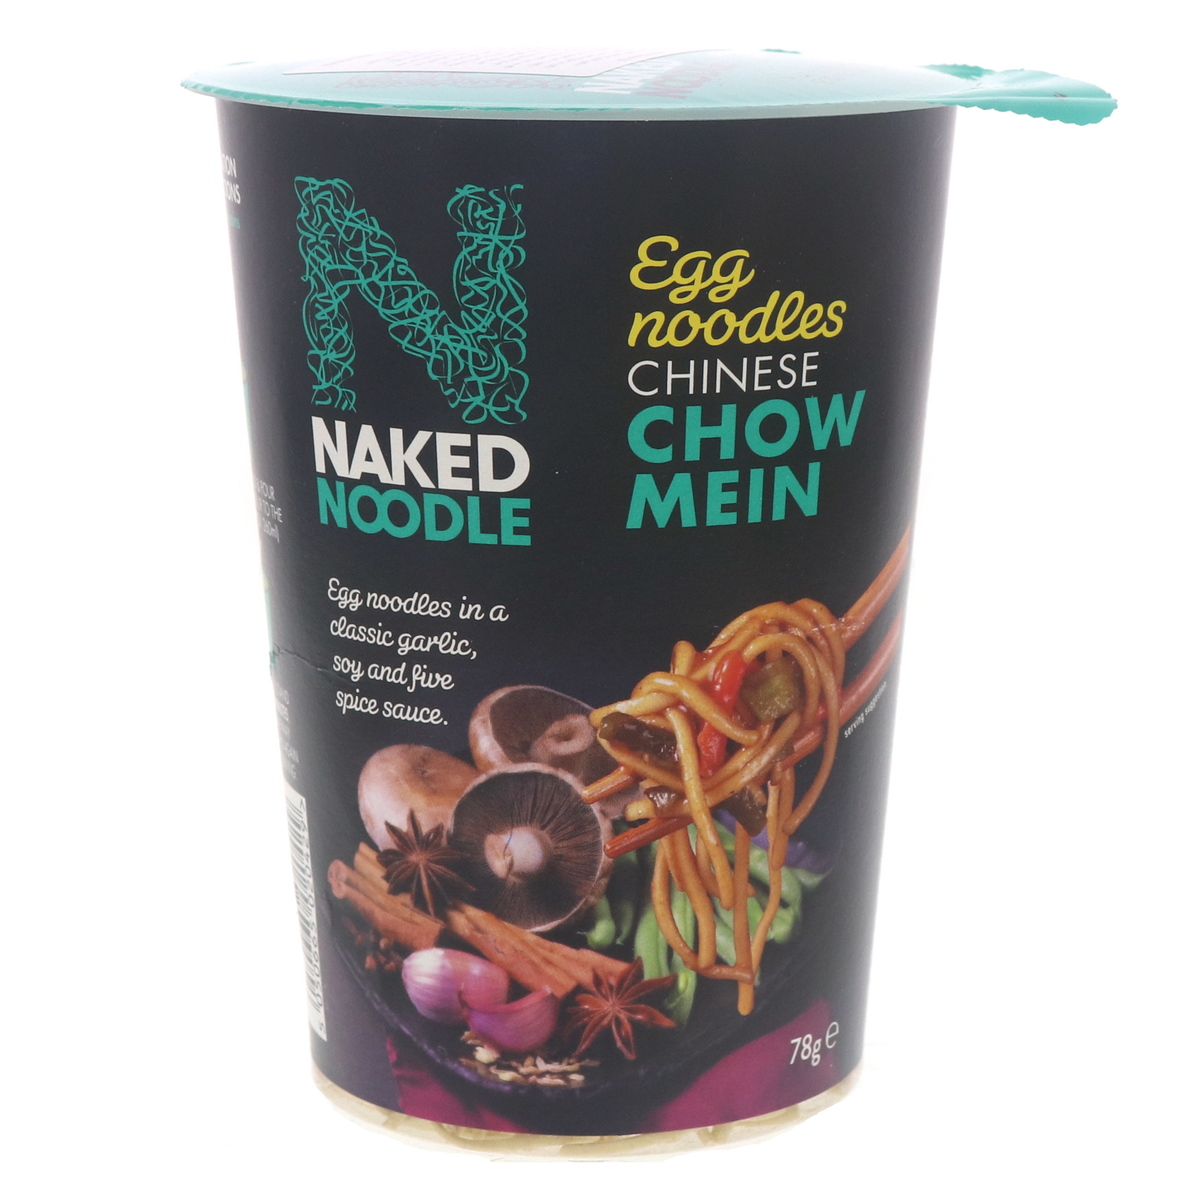 Naked Noodle Chinese Chow Mein Egg Noodles 78g | Cup Noodle | Lulu Qatar